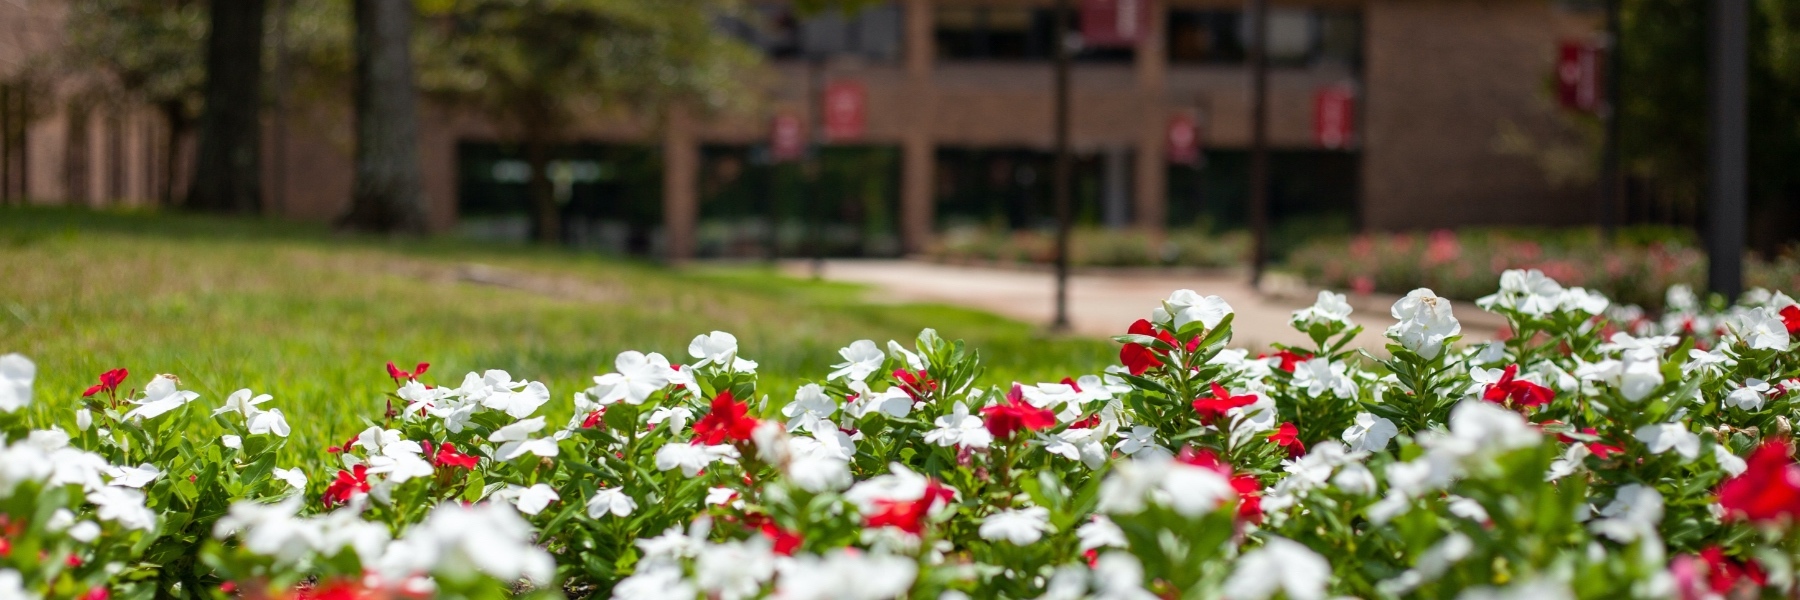 Red and white flowers with the main entrance to Whitewater Hall in the background.